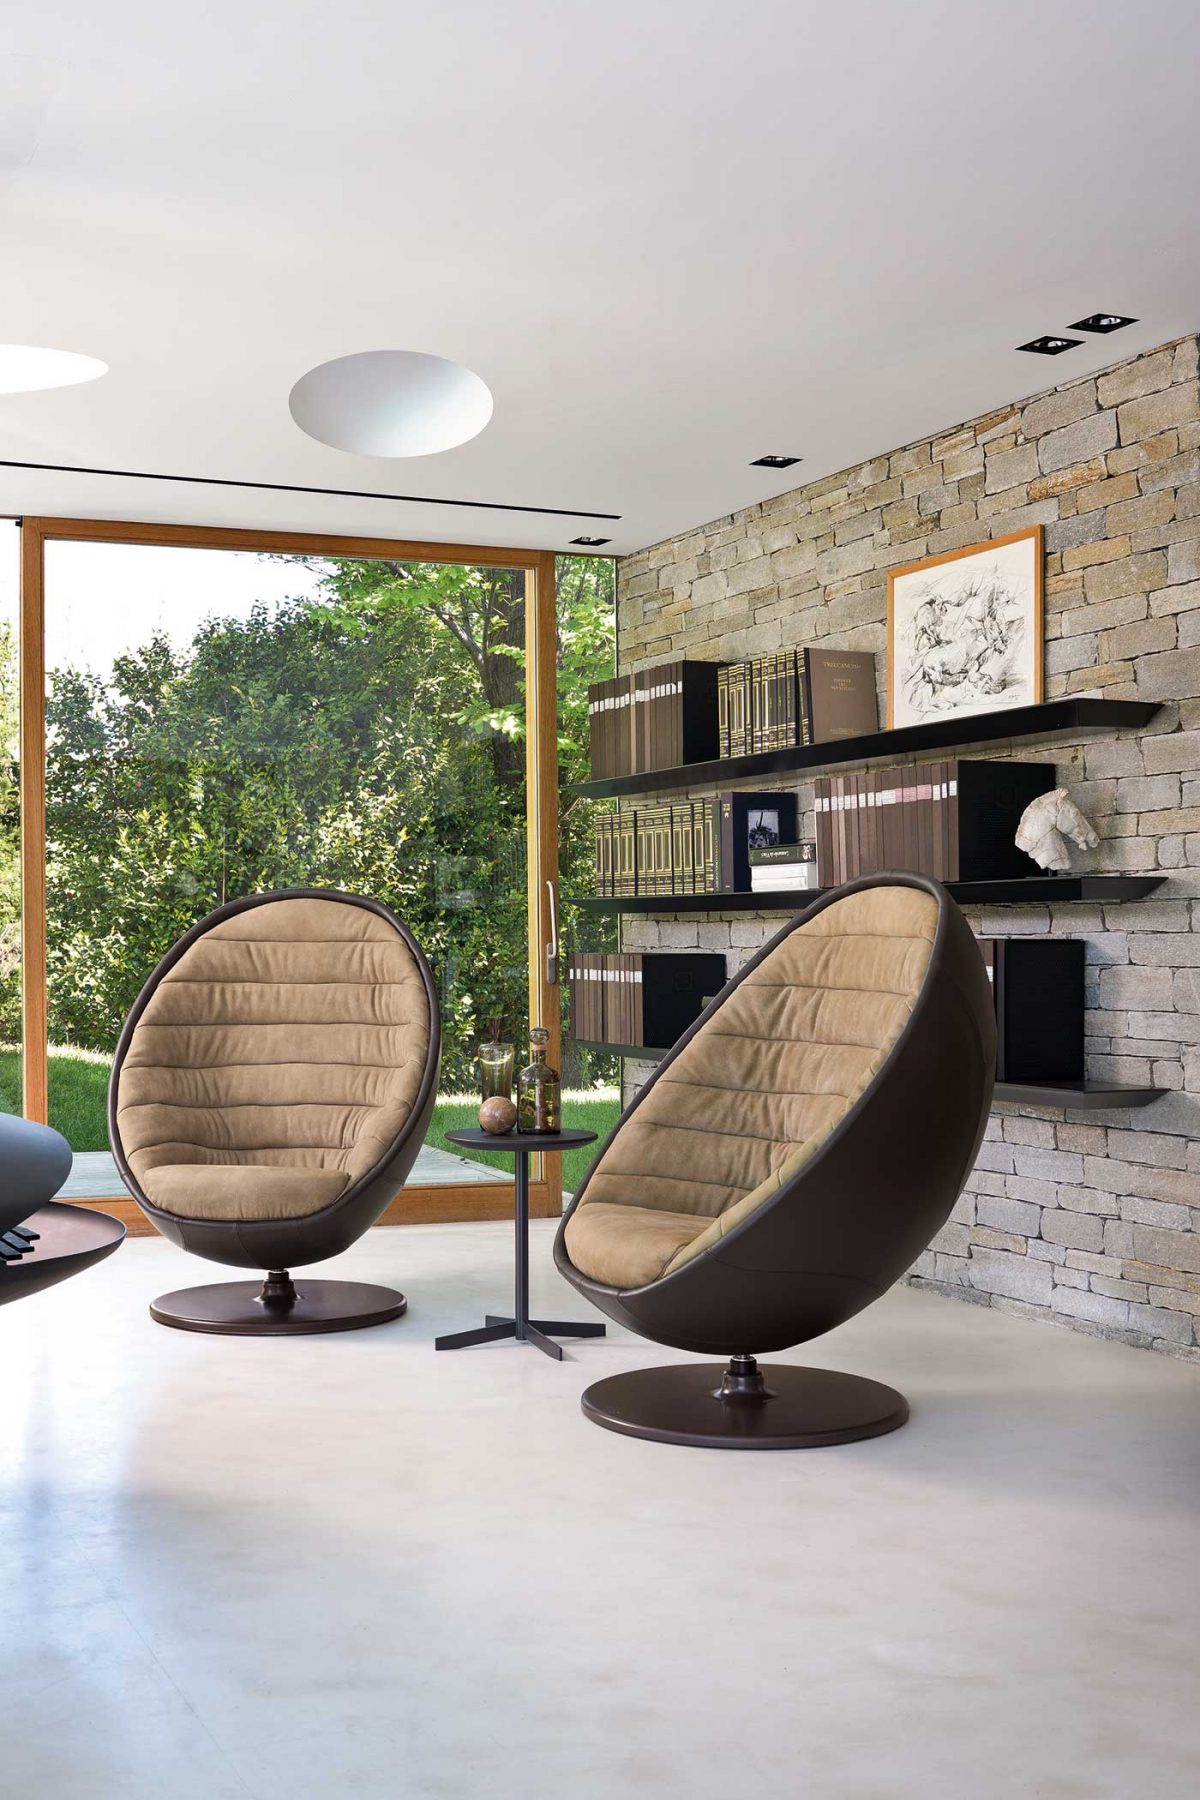 Fauteuil Relax Design Italien - Idees Conception Jardin | Idees